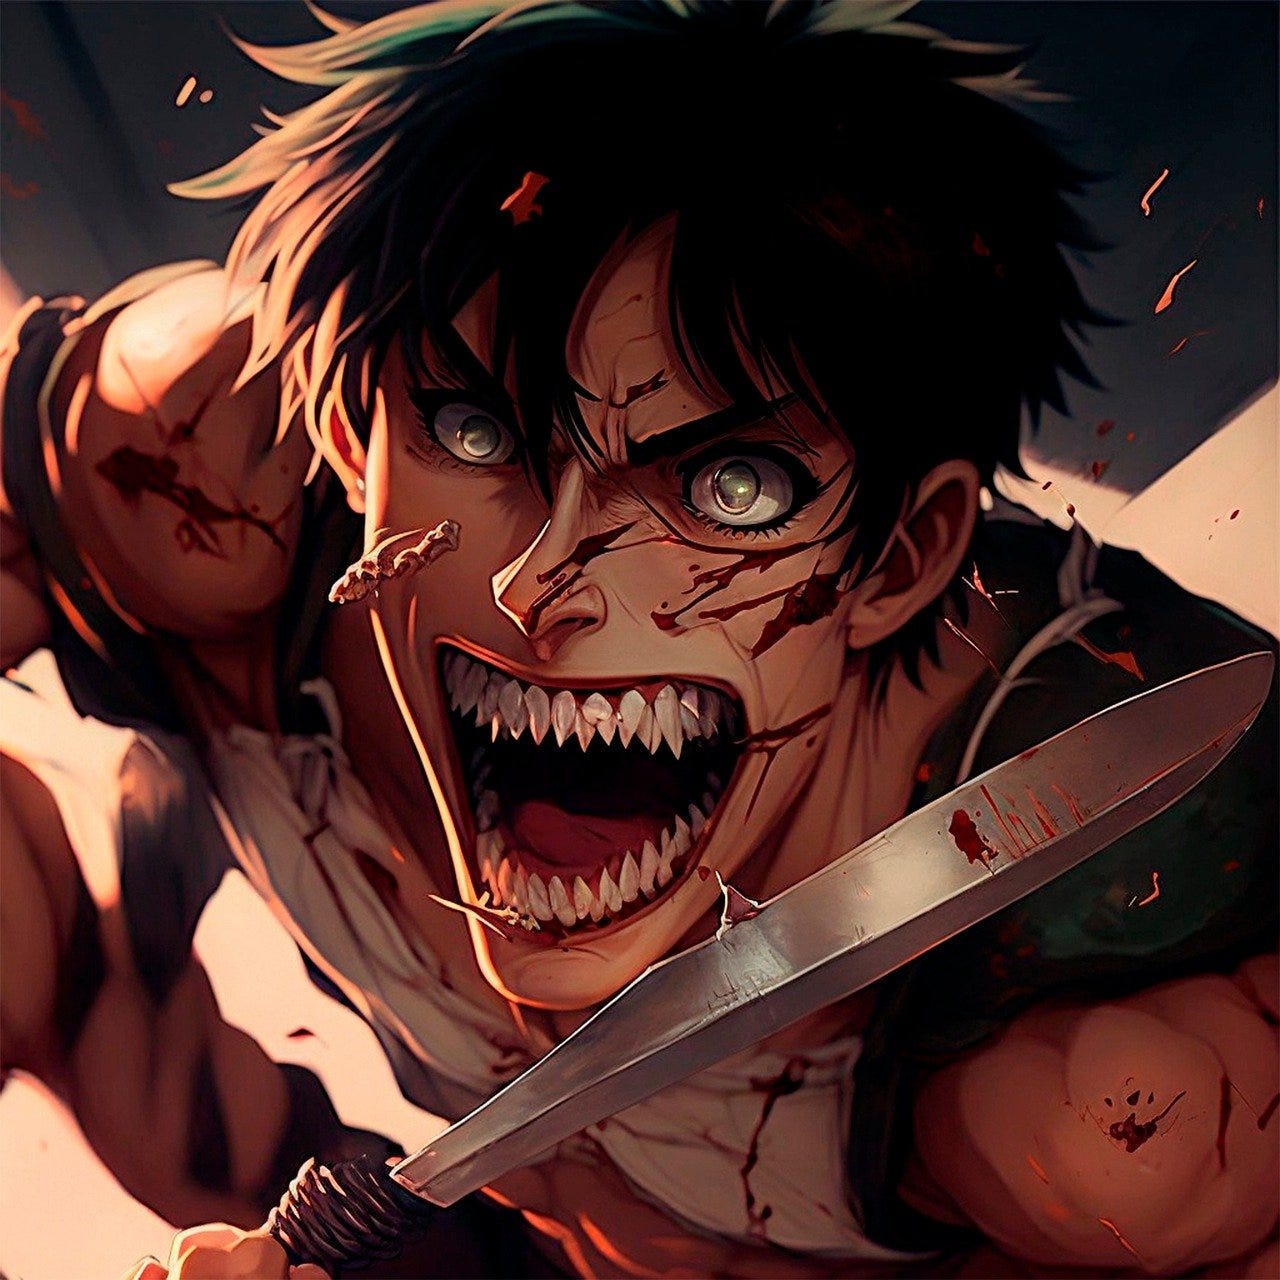 Attack On Titan The Final Season Part 4' Gets A New Trailer